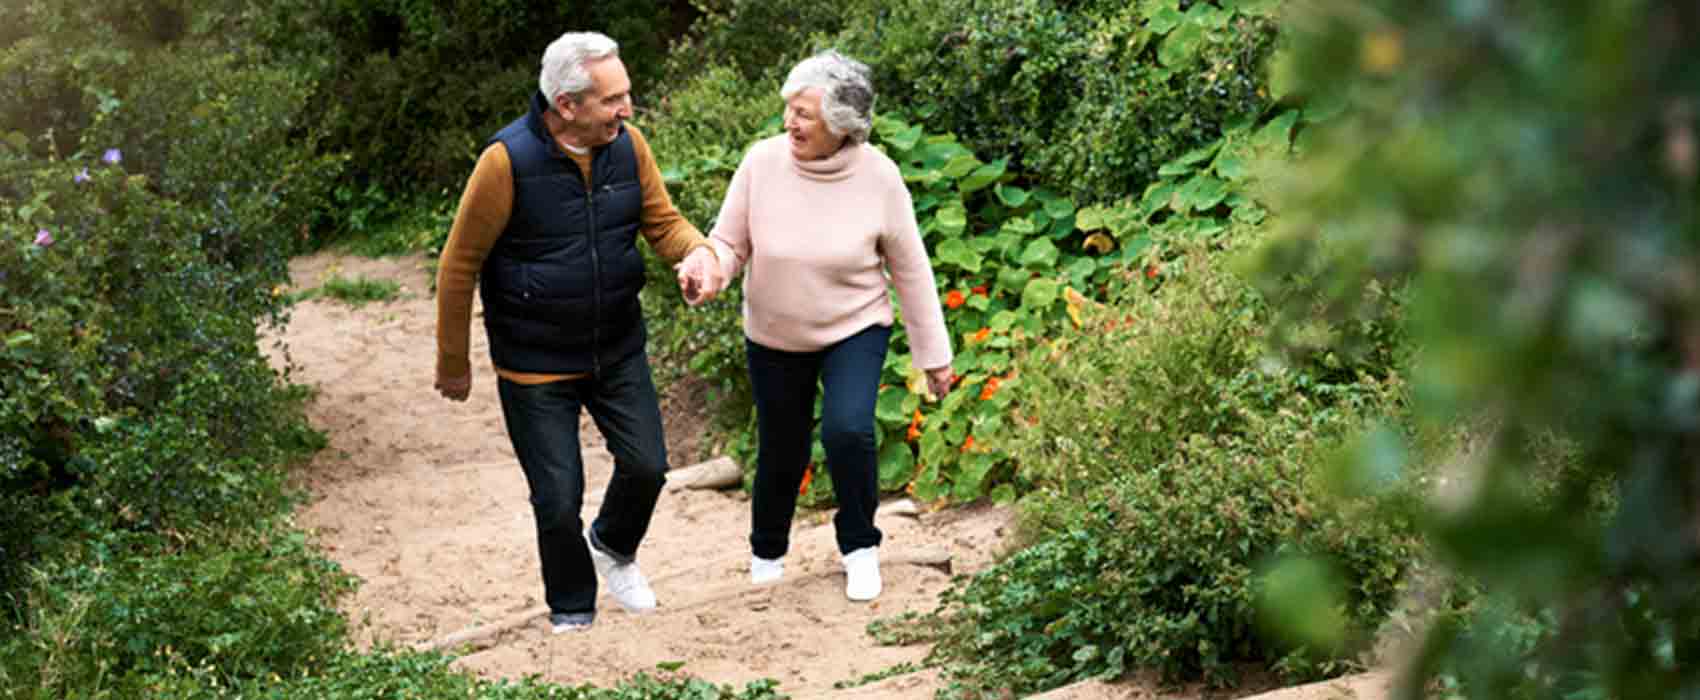 Older man and woman taking a nature walk.